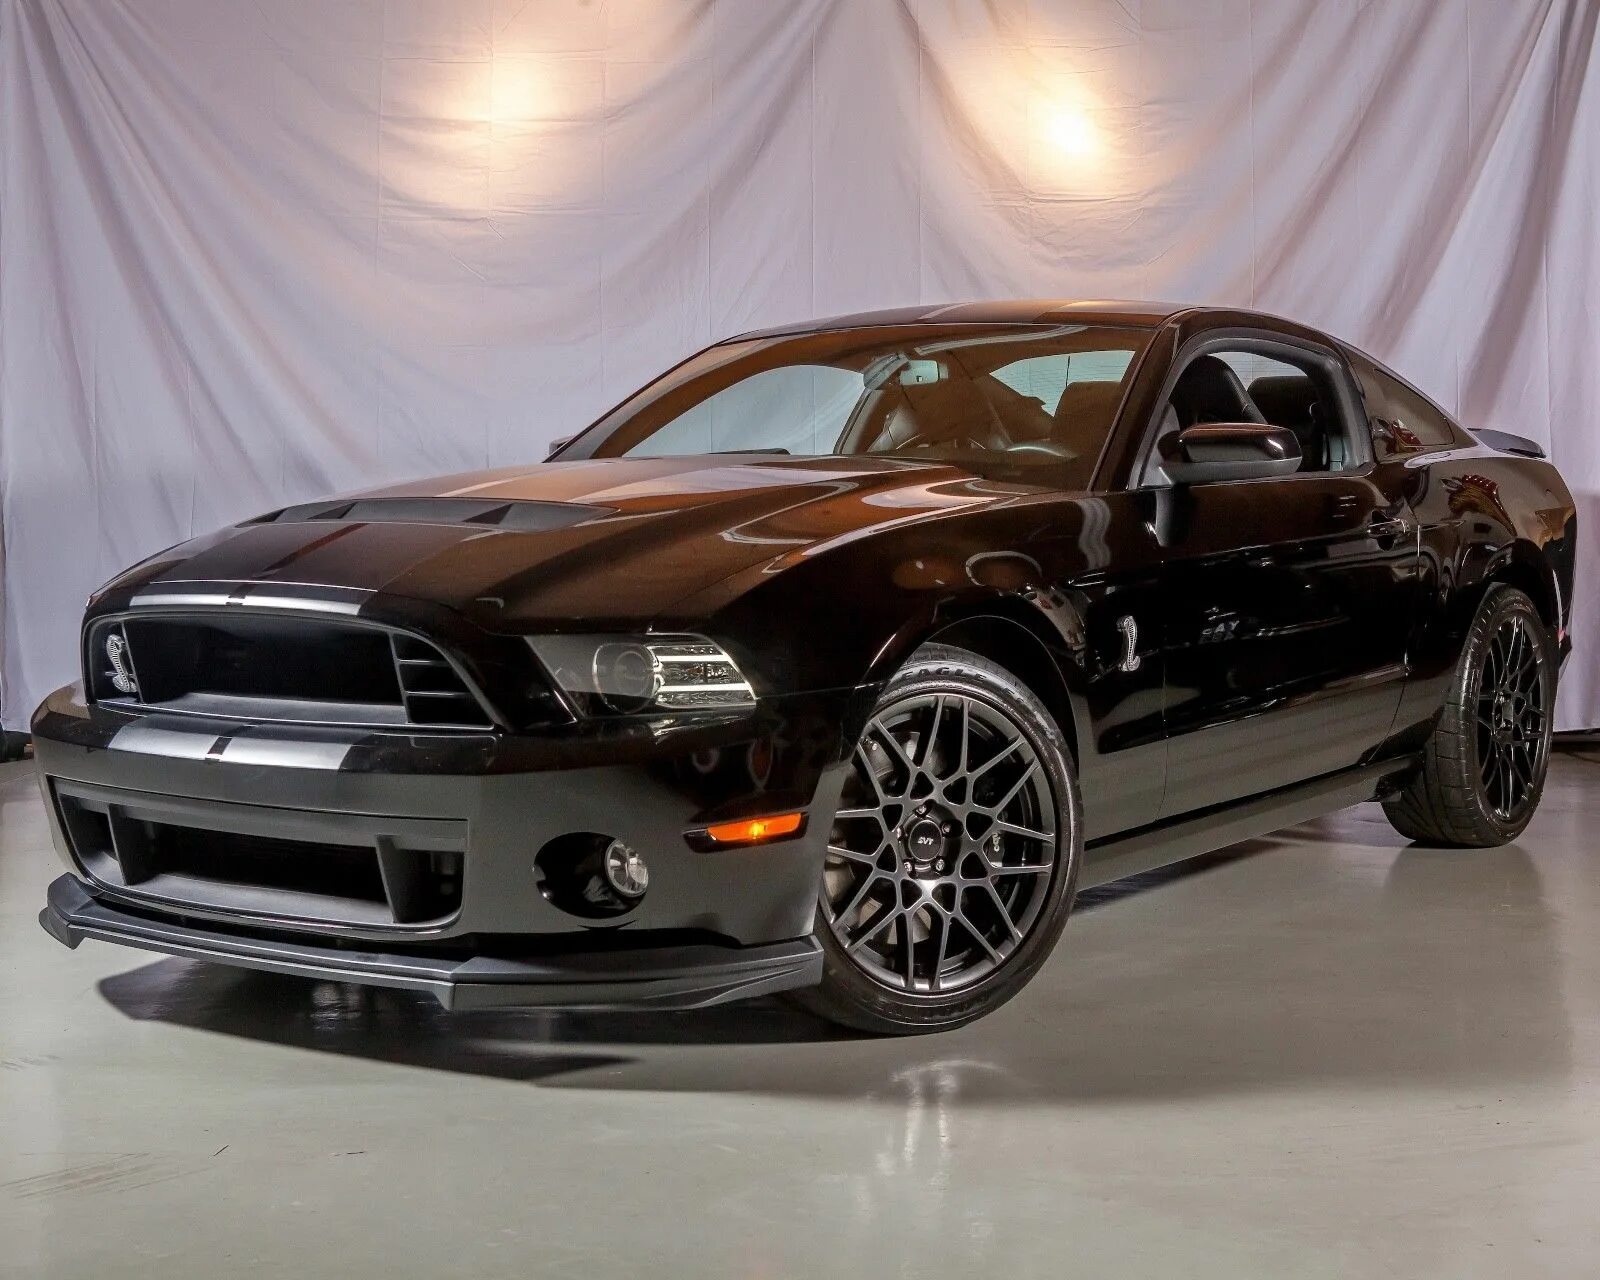 Mustang shelby gt. Форд Мустанг gt 500. Форд Мустанг Шелби gt 500. Форд Мустанг Шелби gt 500 2013. Ford Mustang Shelby gt500 2013.